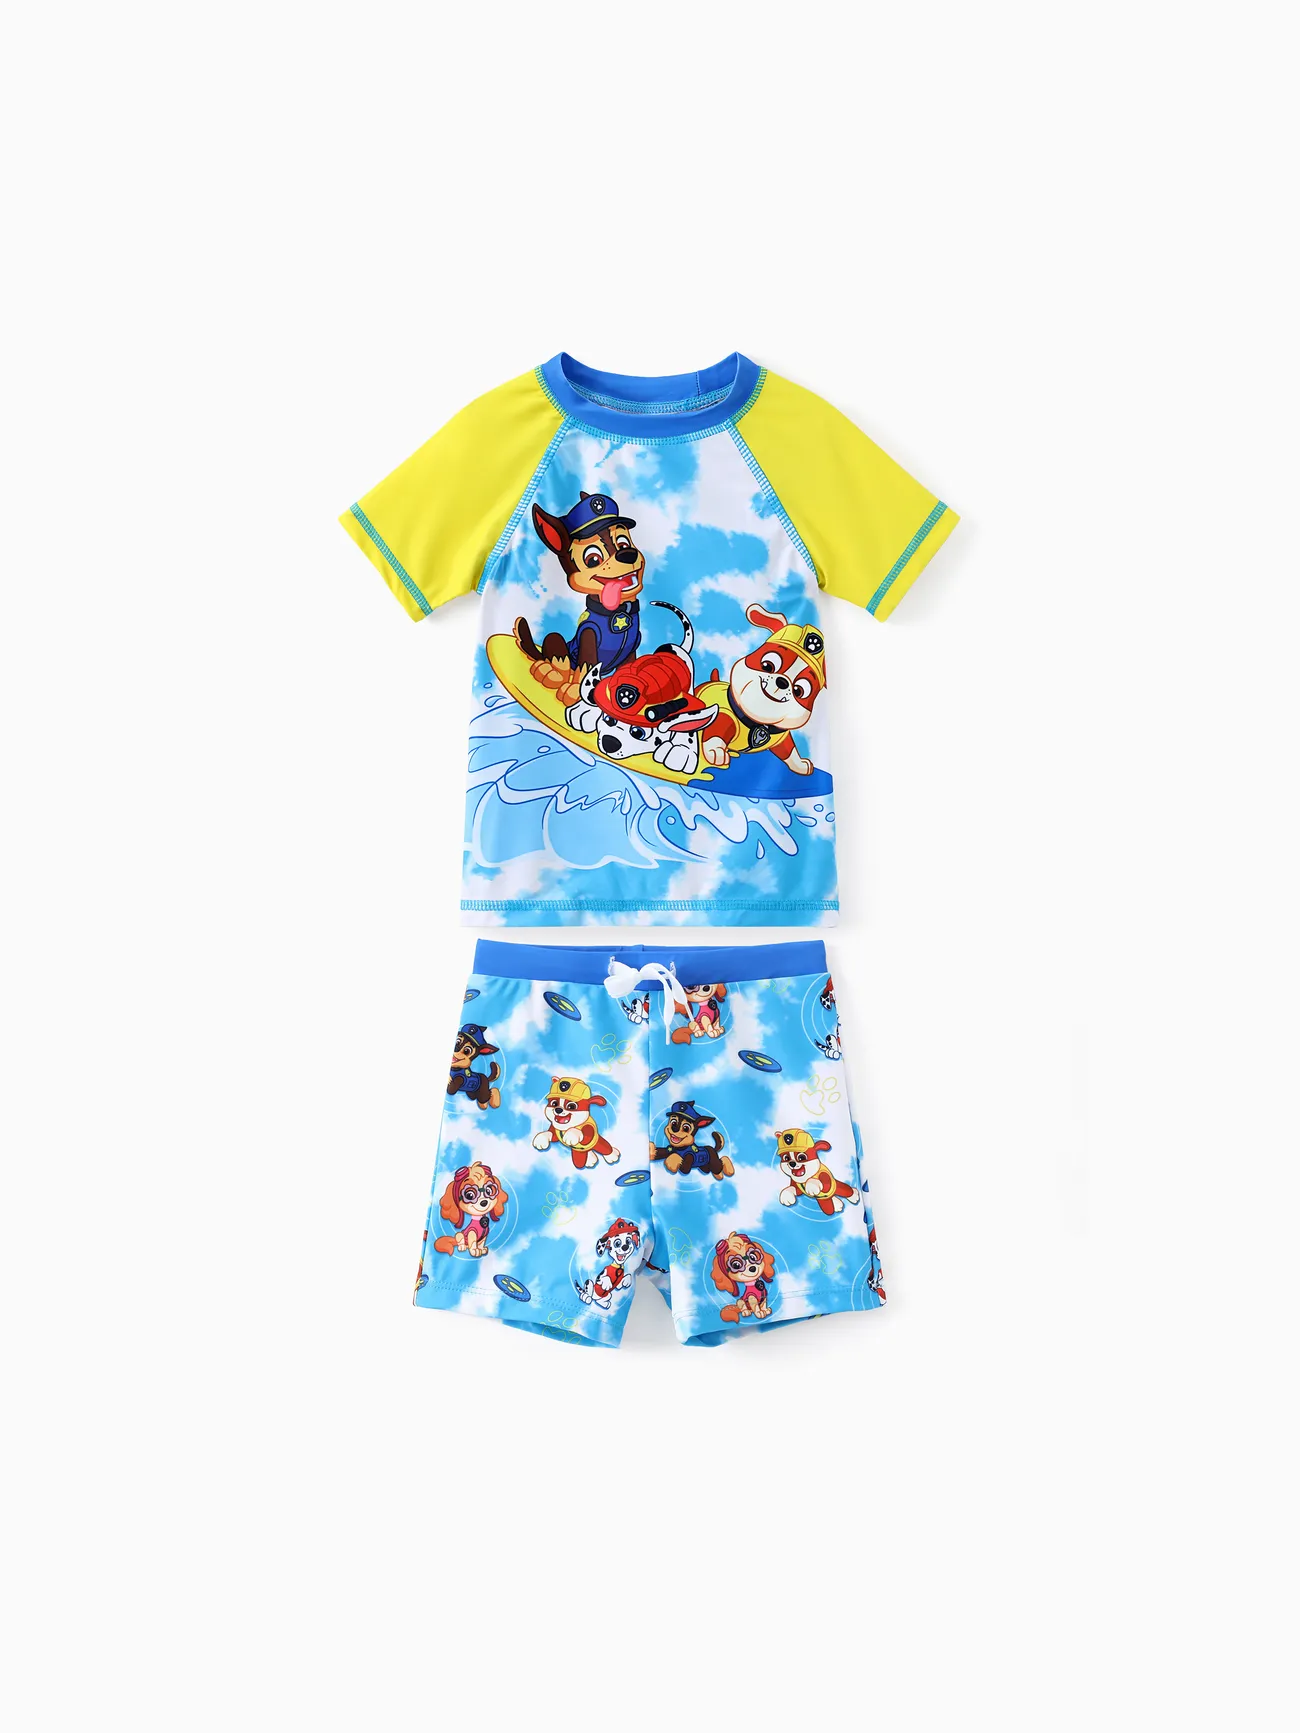 PAW Patrol Toddler Boy 2pcs Colorblock Tops and Trunks Swimsuit Navy big image 1